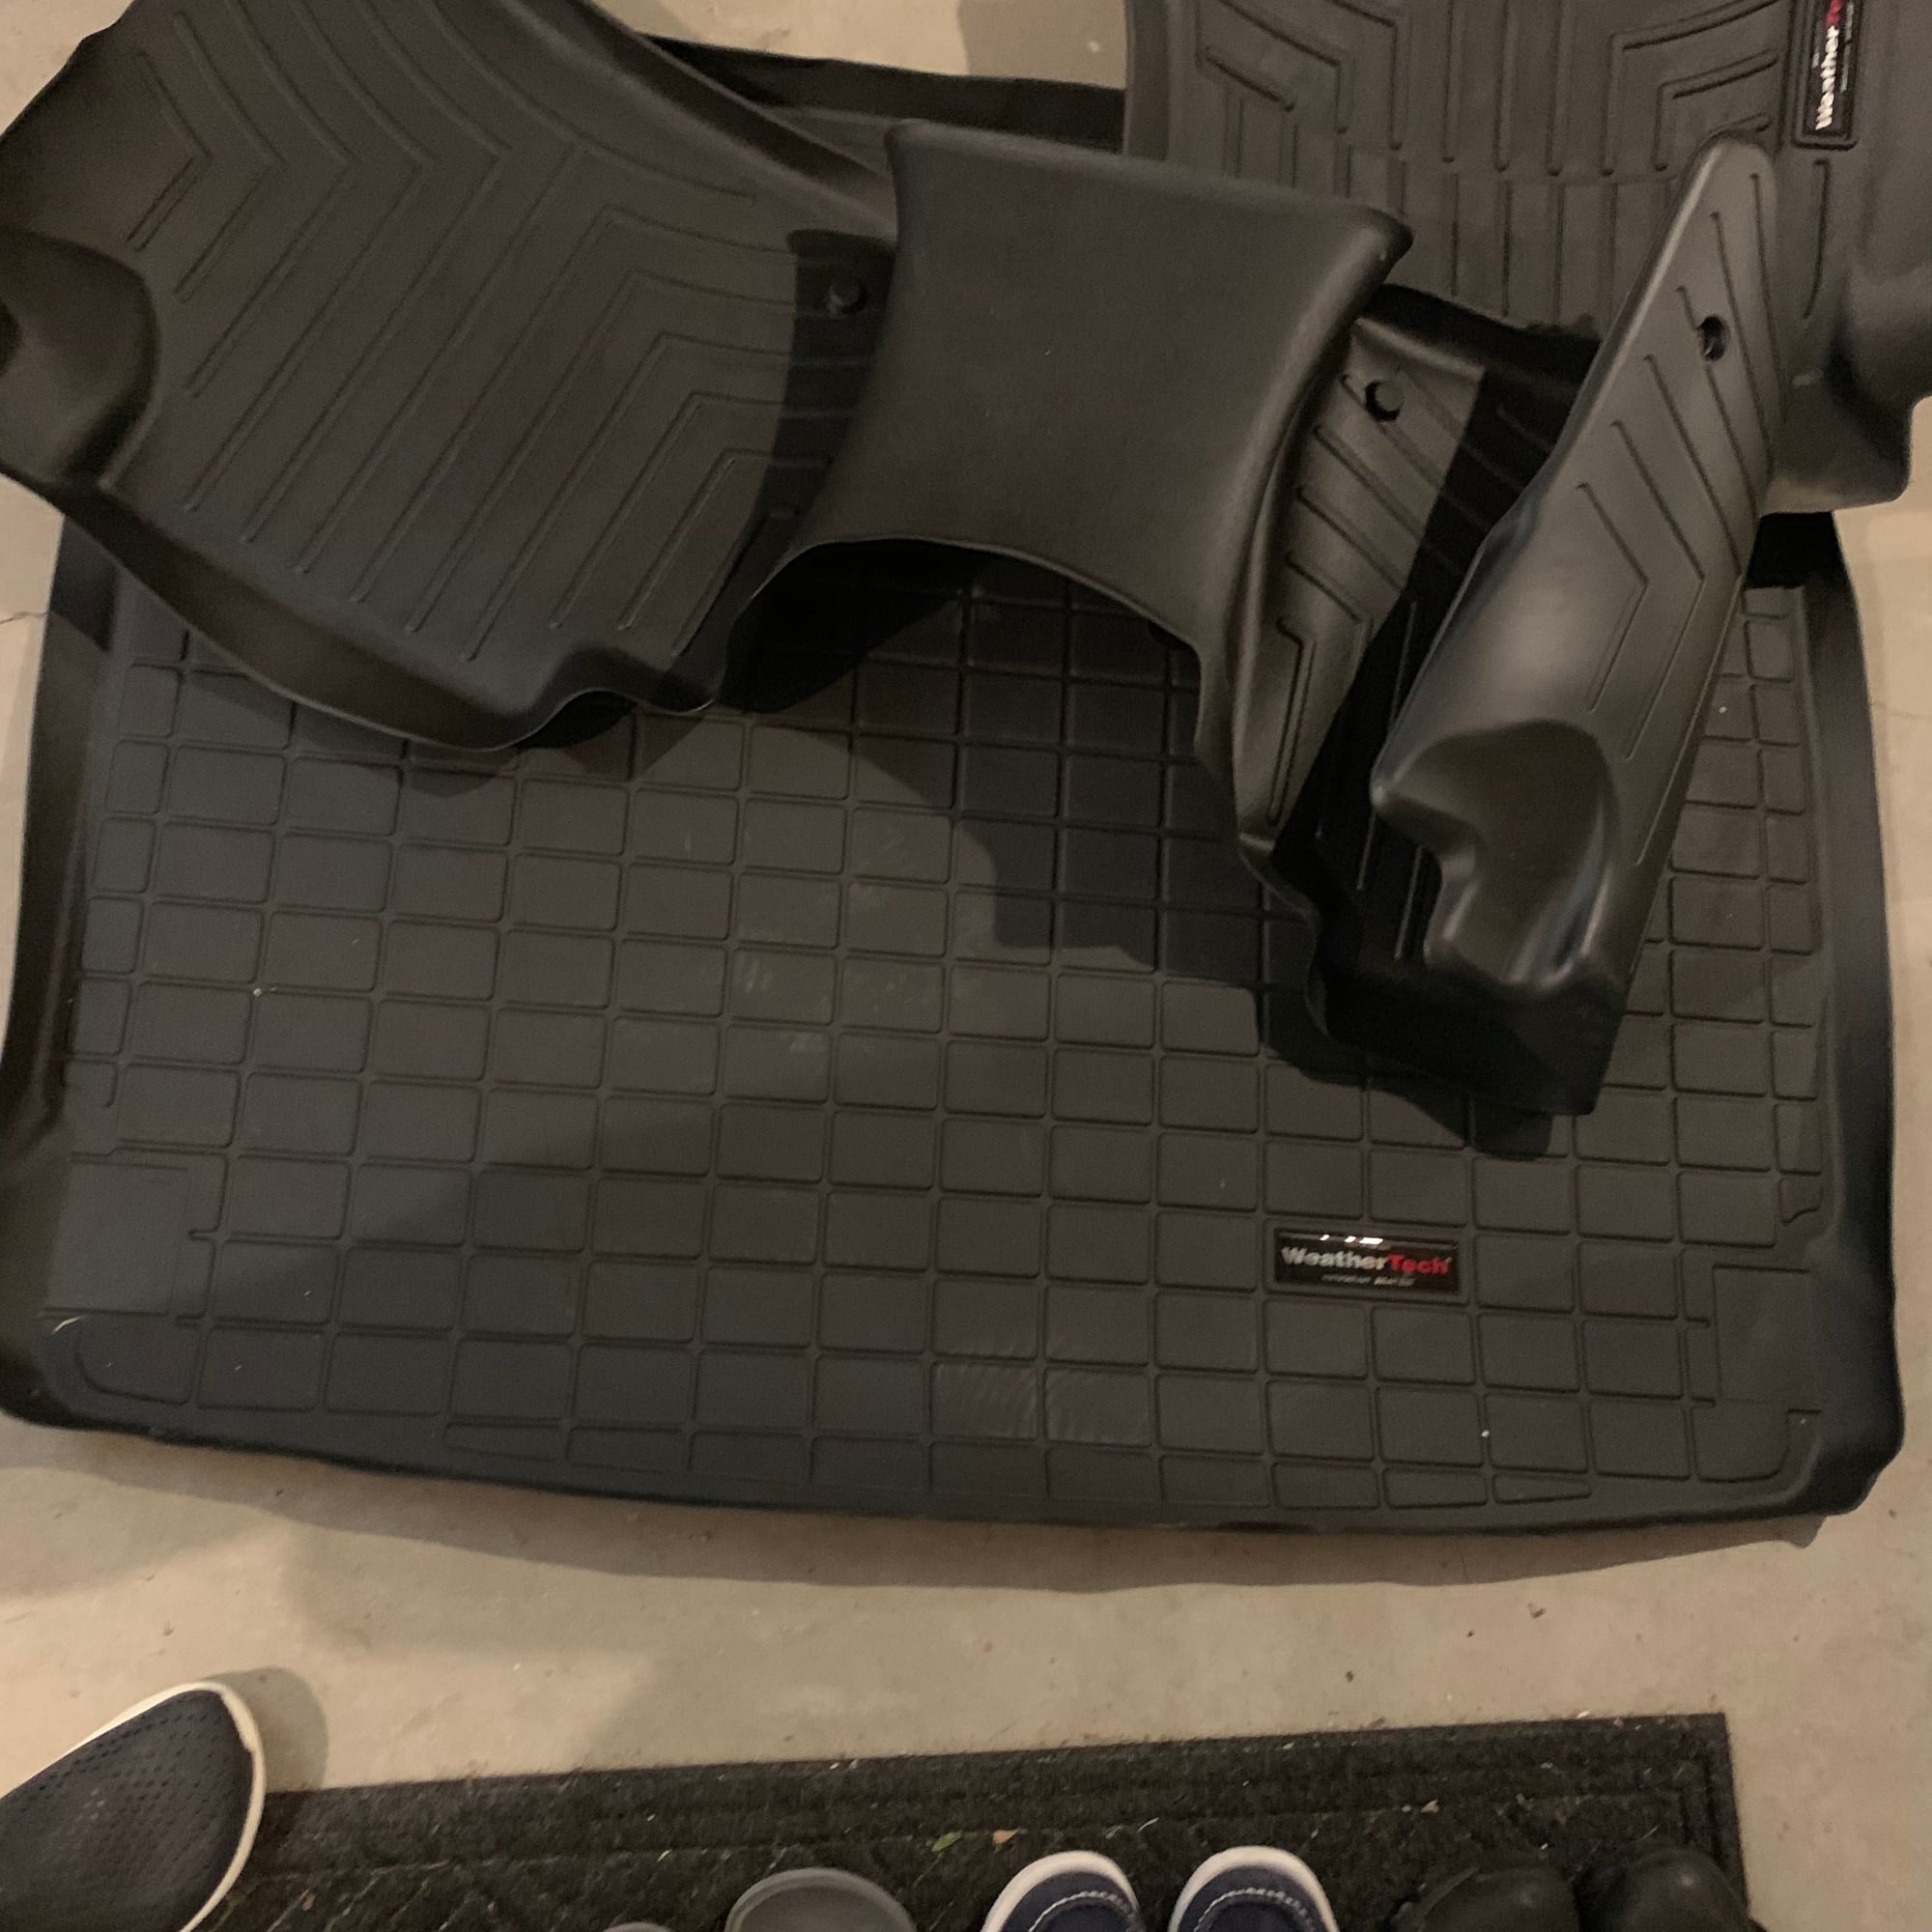 Interior/Upholstery - WeatherTech Floormats and Cargo Liner - Porsche Cayenne - Used - All Years Porsche Cayenne - Windham, NH 03087, United States